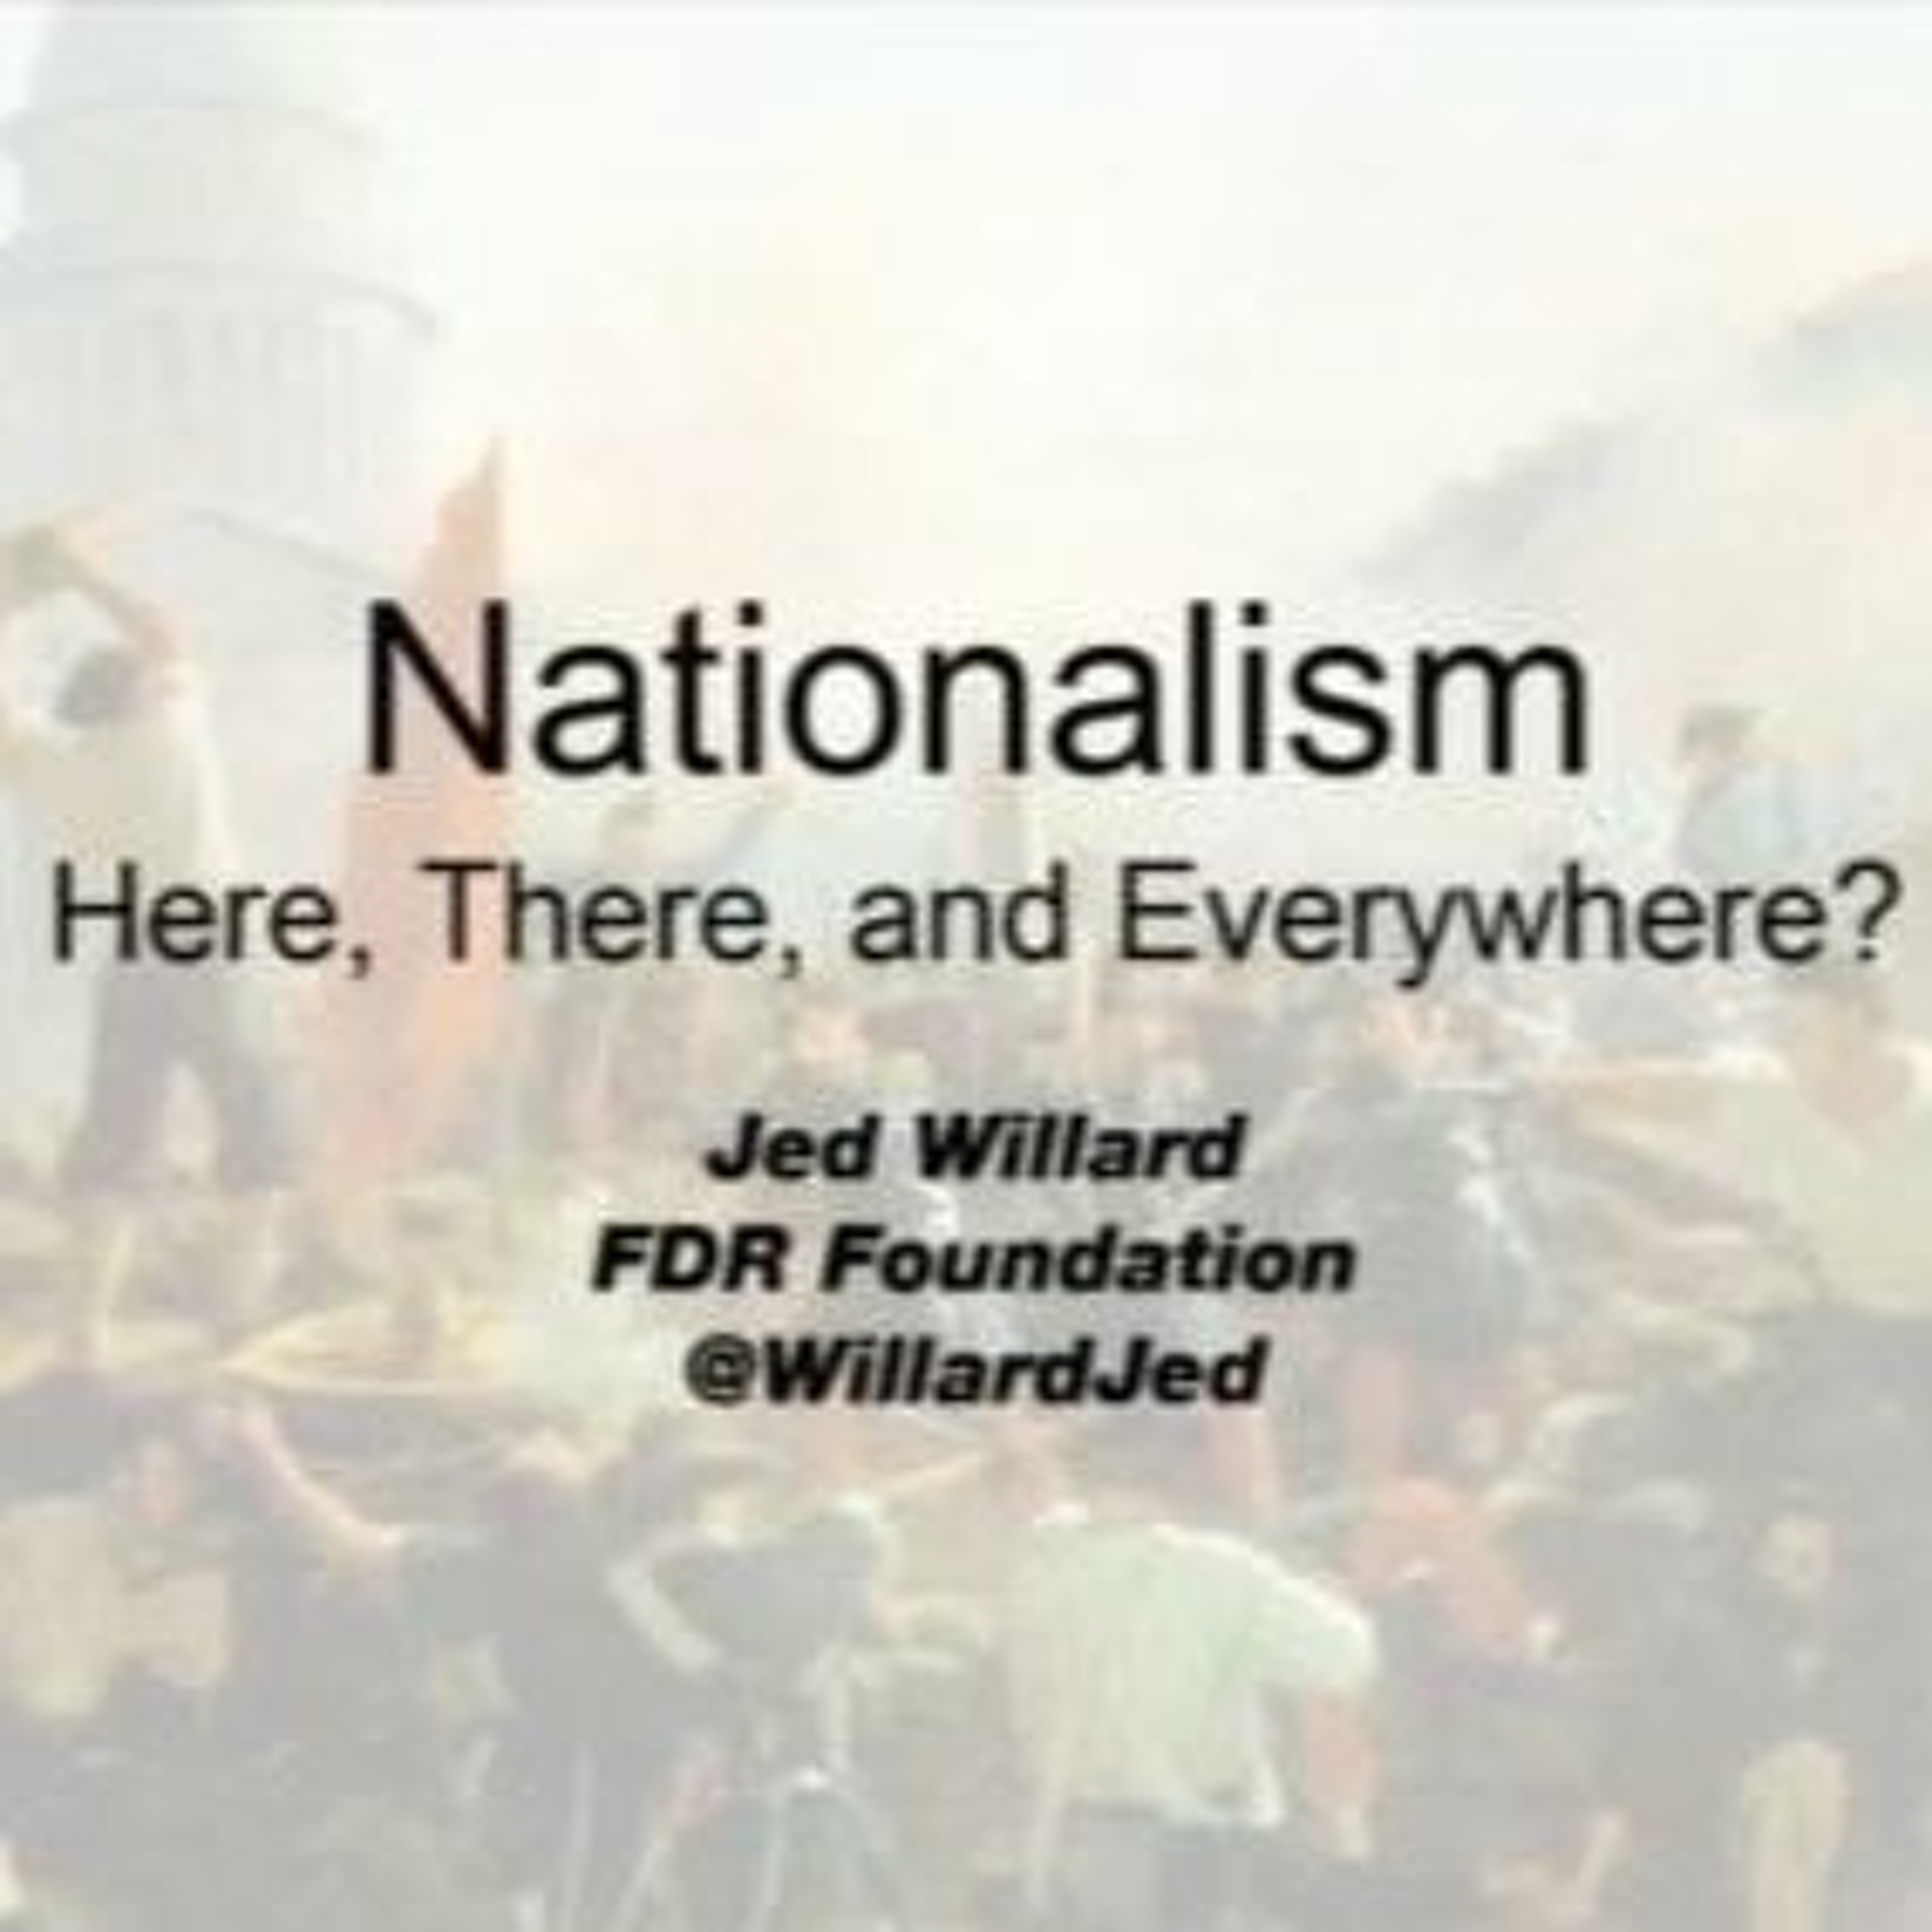 Jed Willard, “Nationalism: Here, There, and Everywhere?”